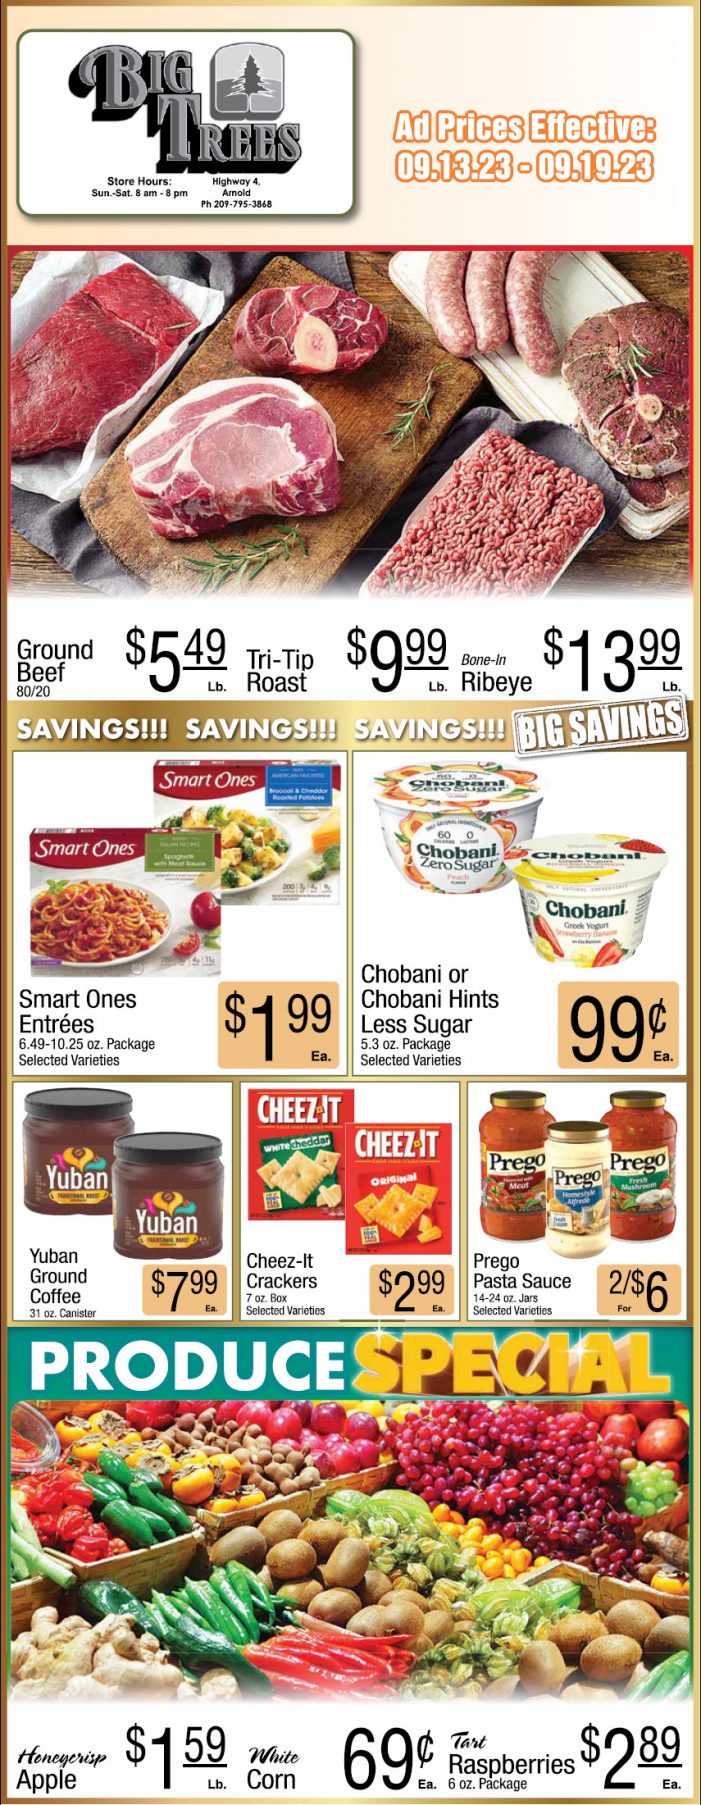 Big Trees Market Weekly Ad, Grocery, Produce, Meat & Deli Specials Through September 19th!  Shop Local & Save!